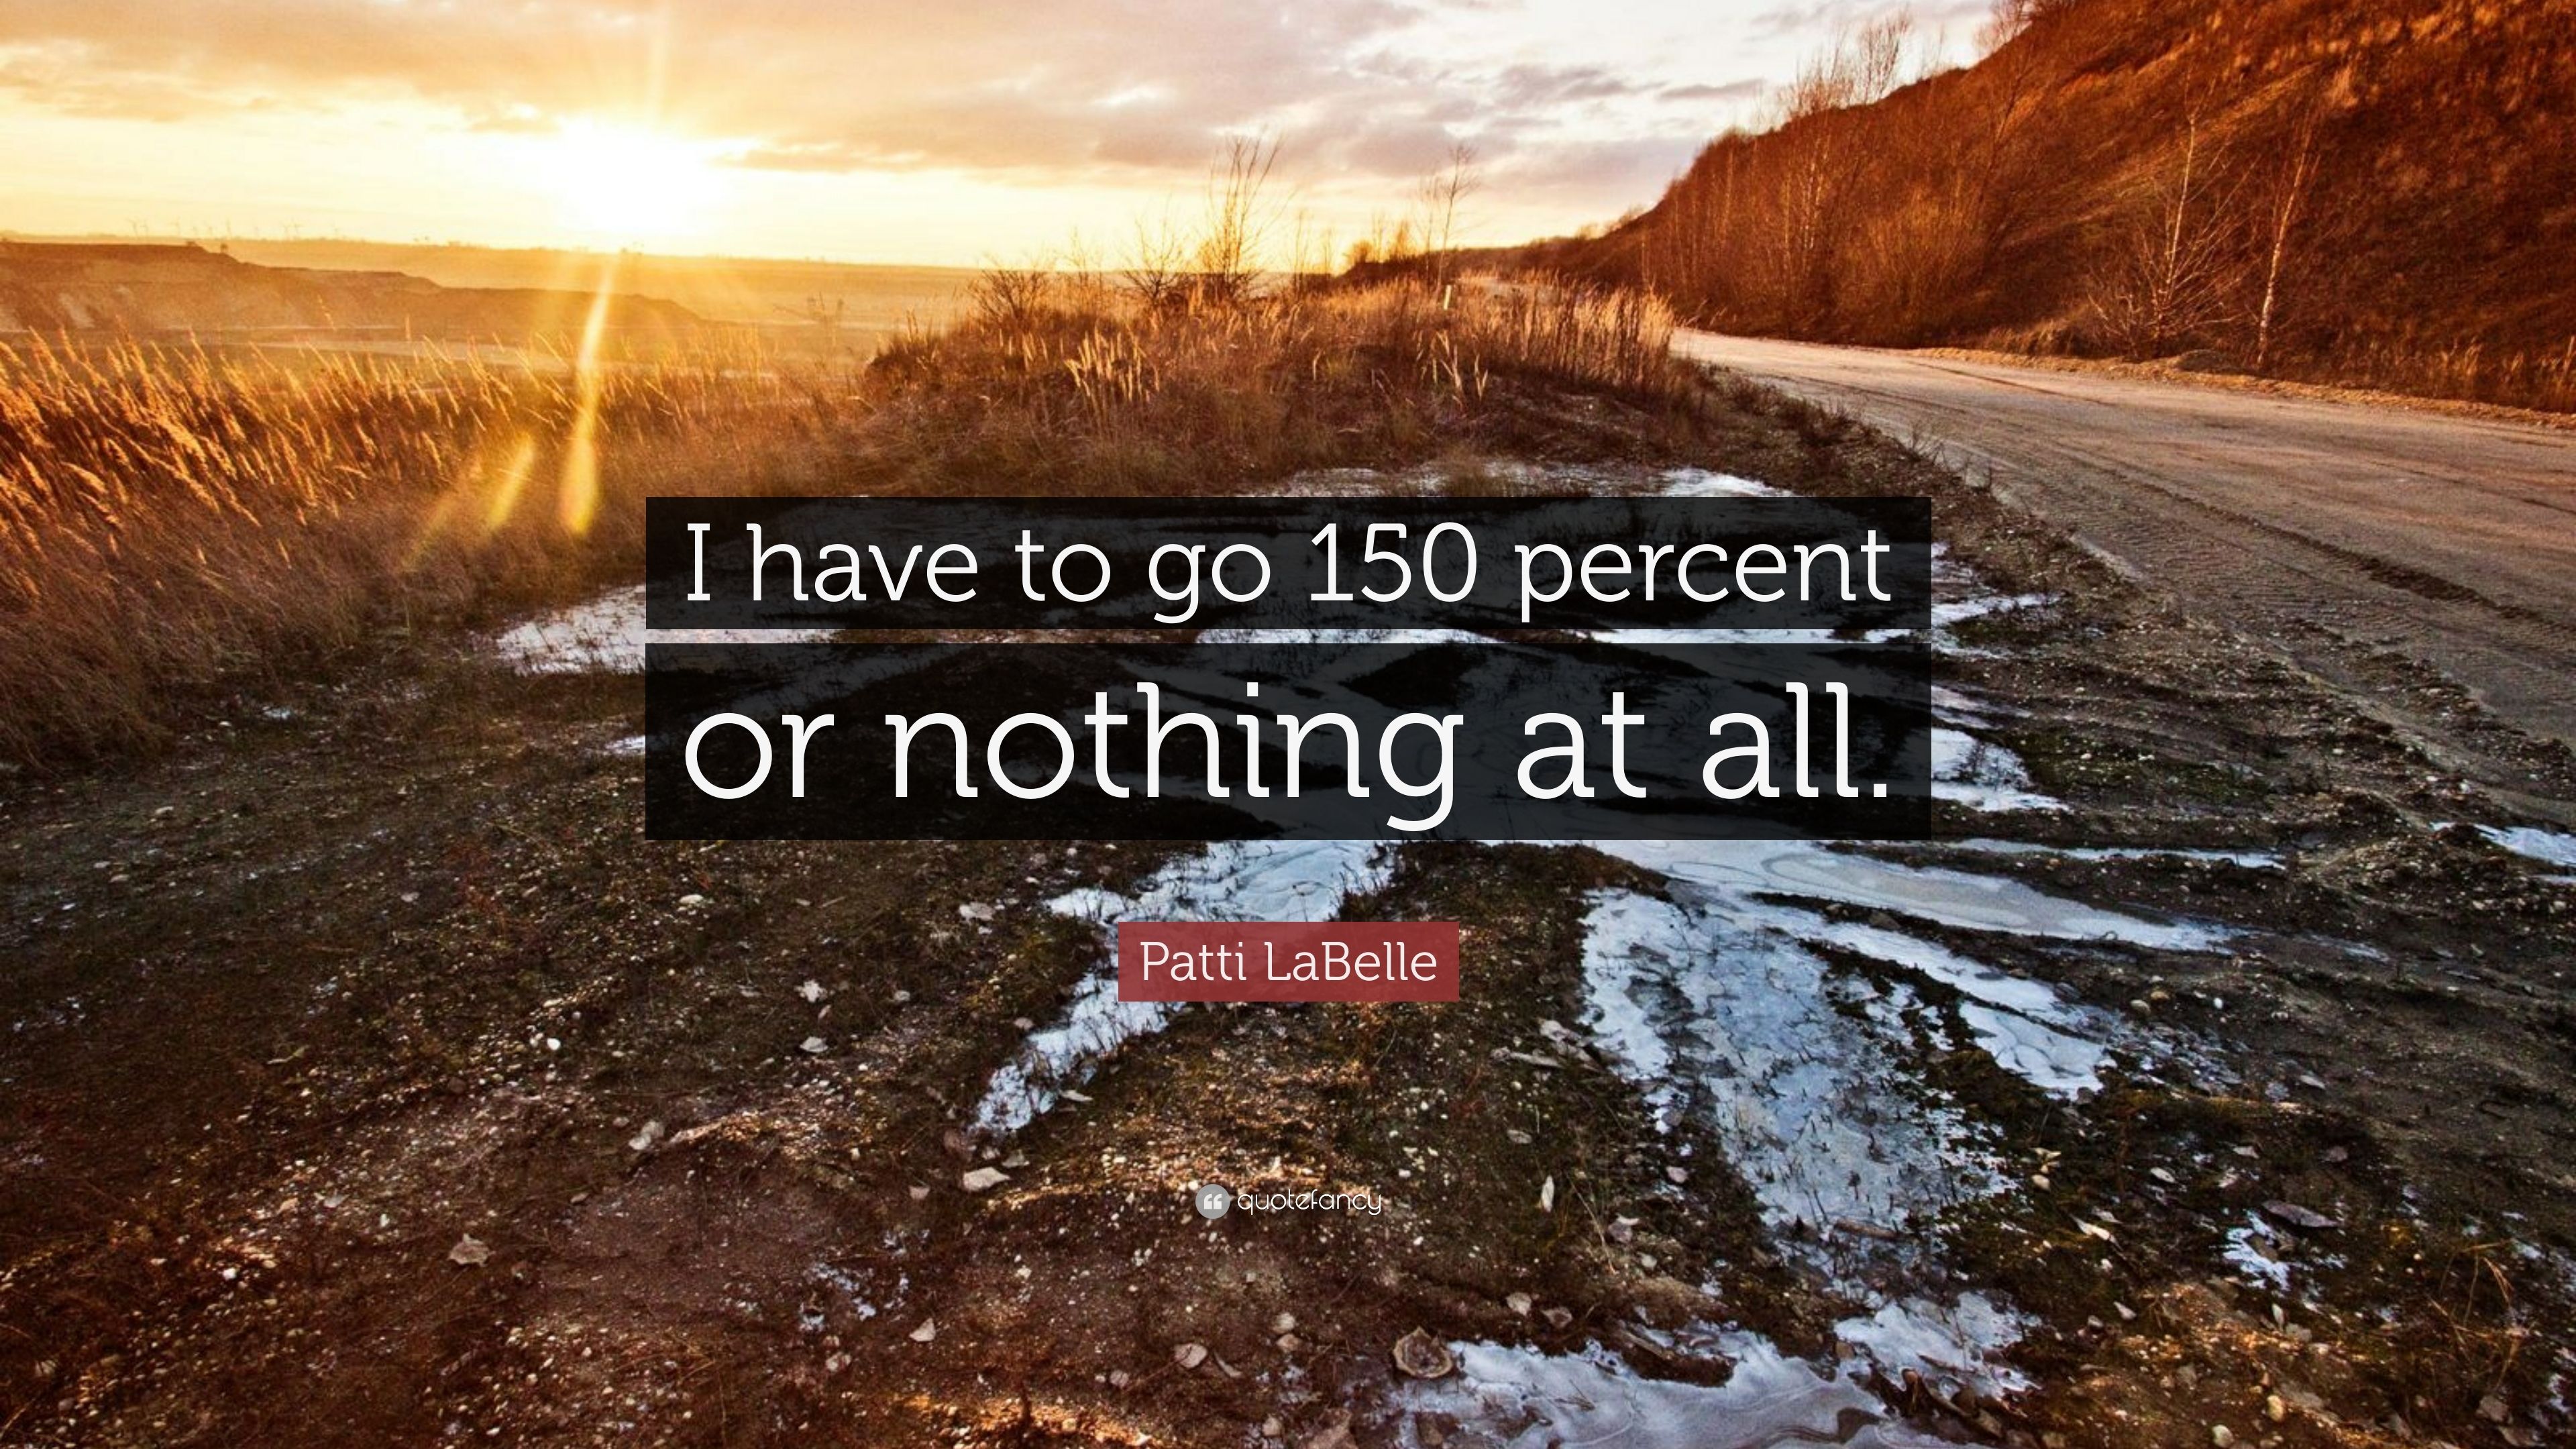 Patti LaBelle Quote: “I have to go 150 percent or nothing at all